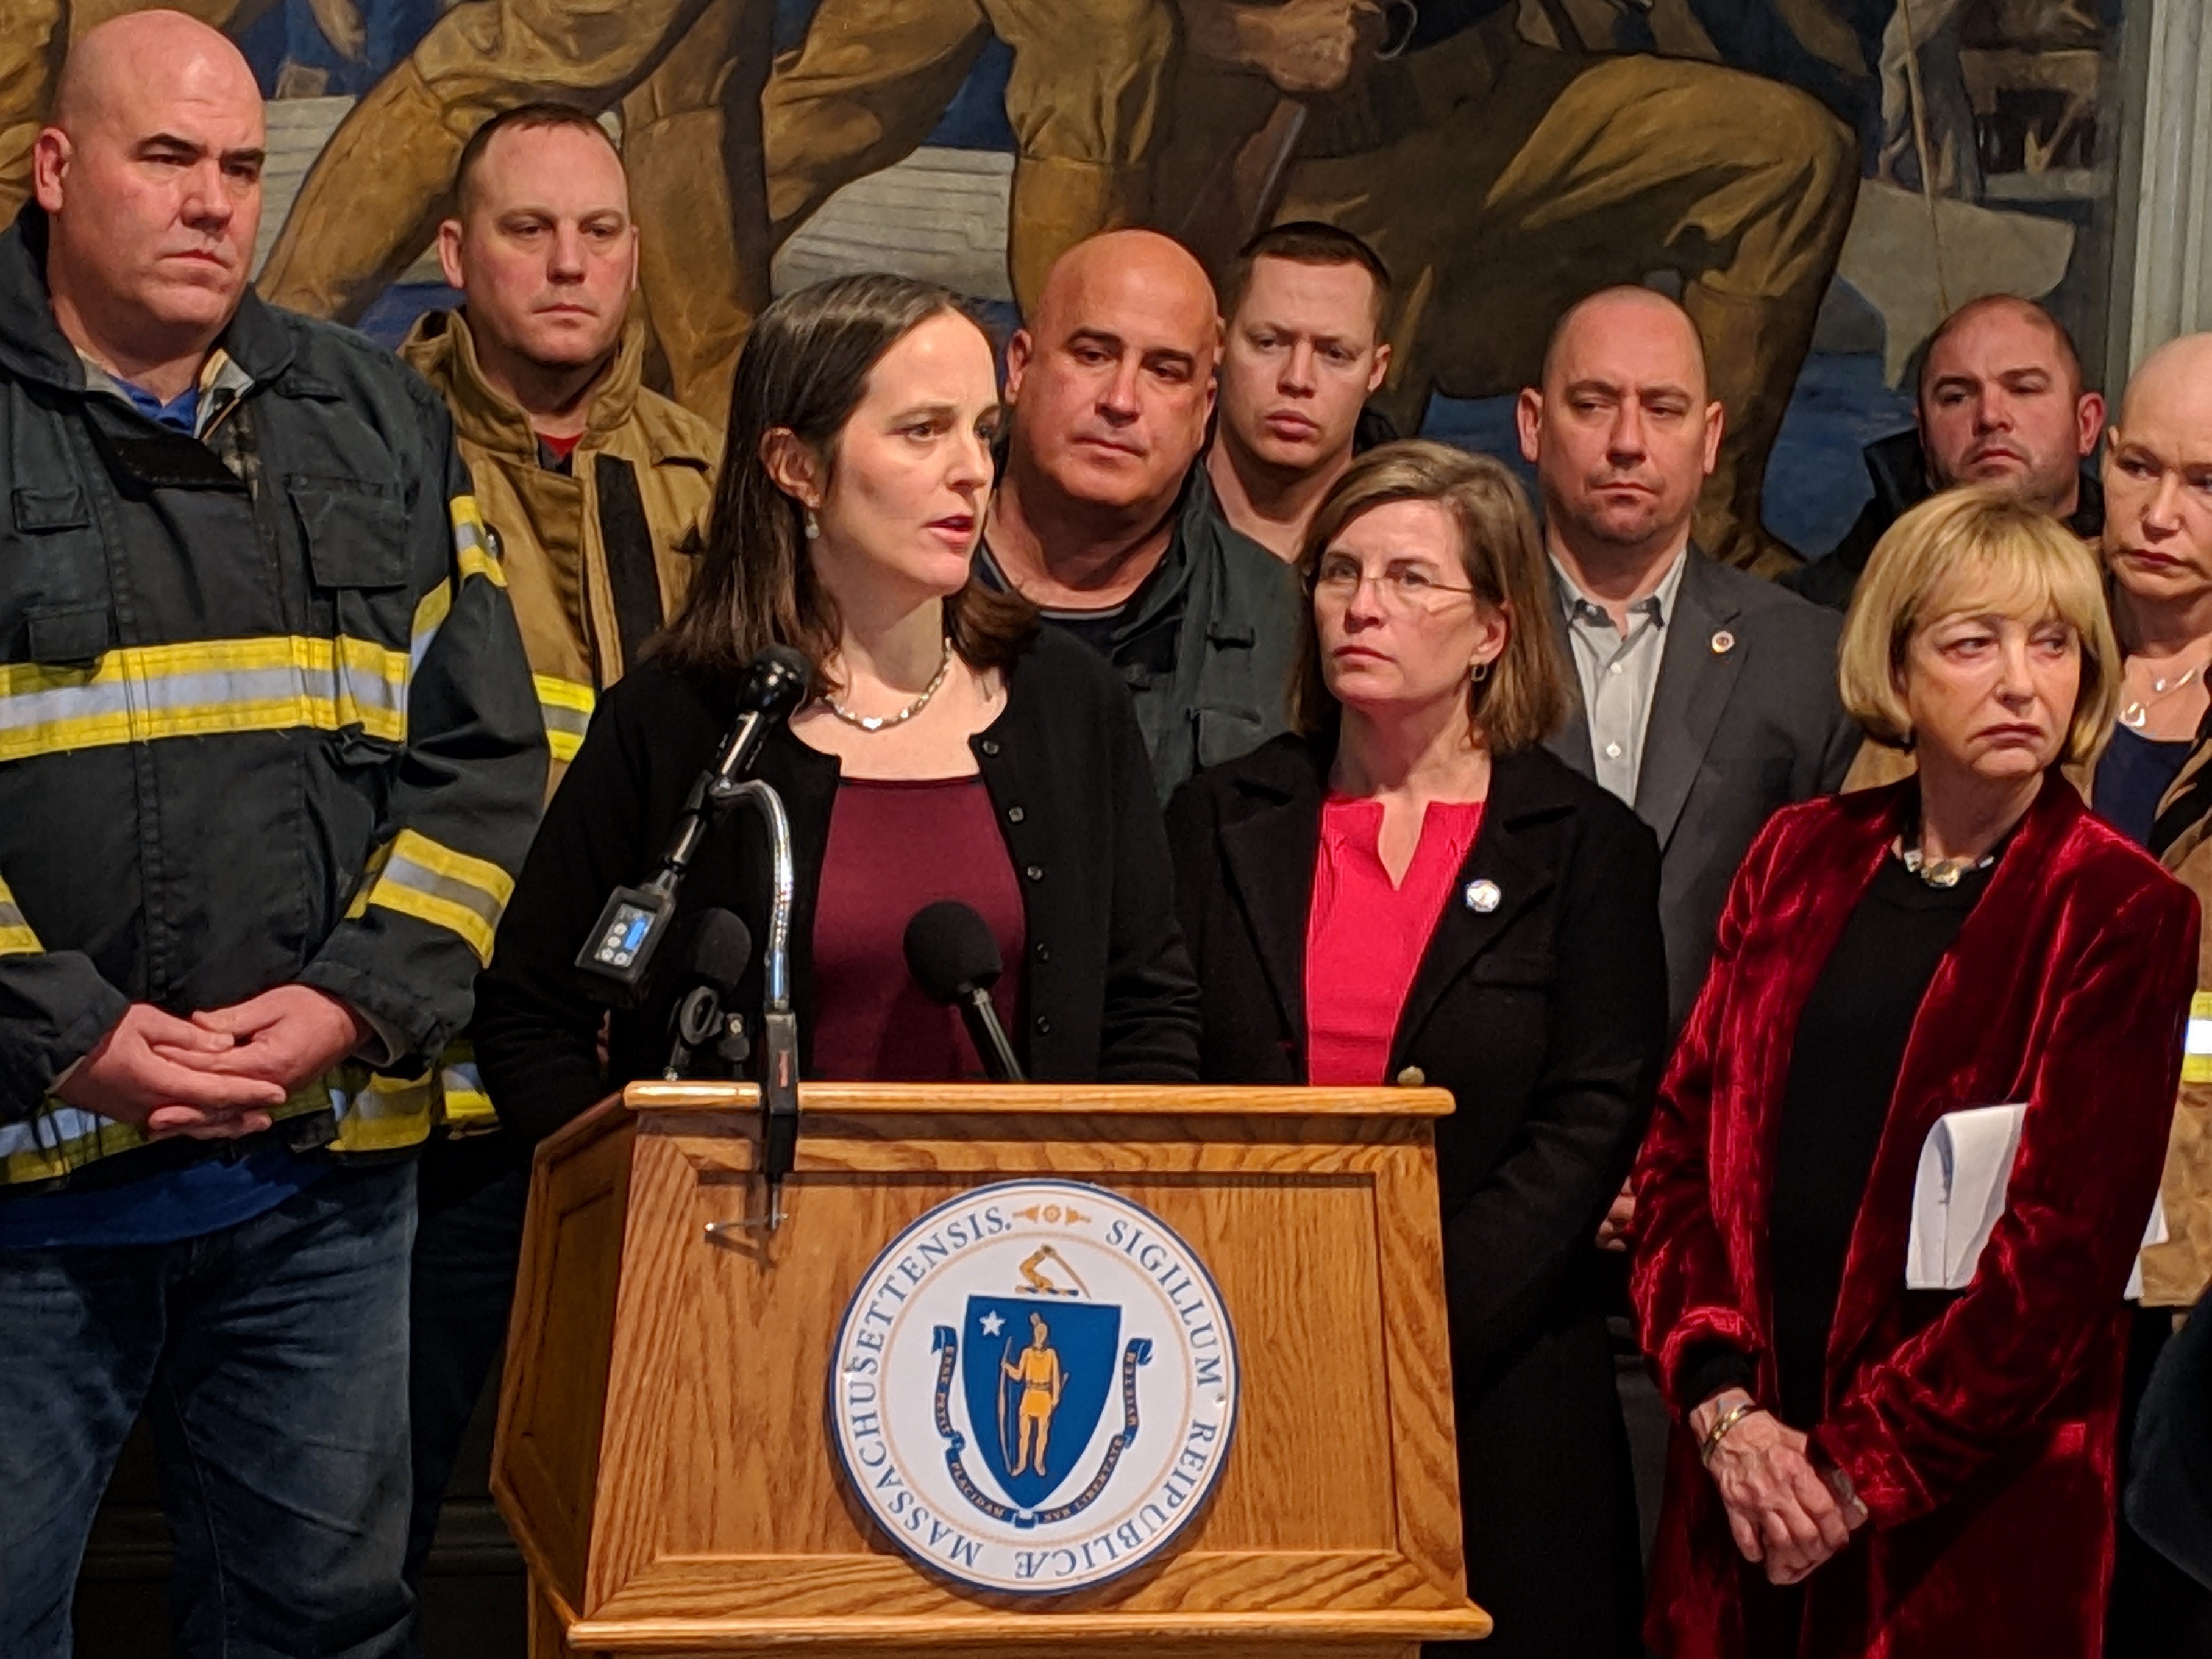 MA_Elizabeth Saunders_Firefighter and Childrens protection act press conf Jan 2019